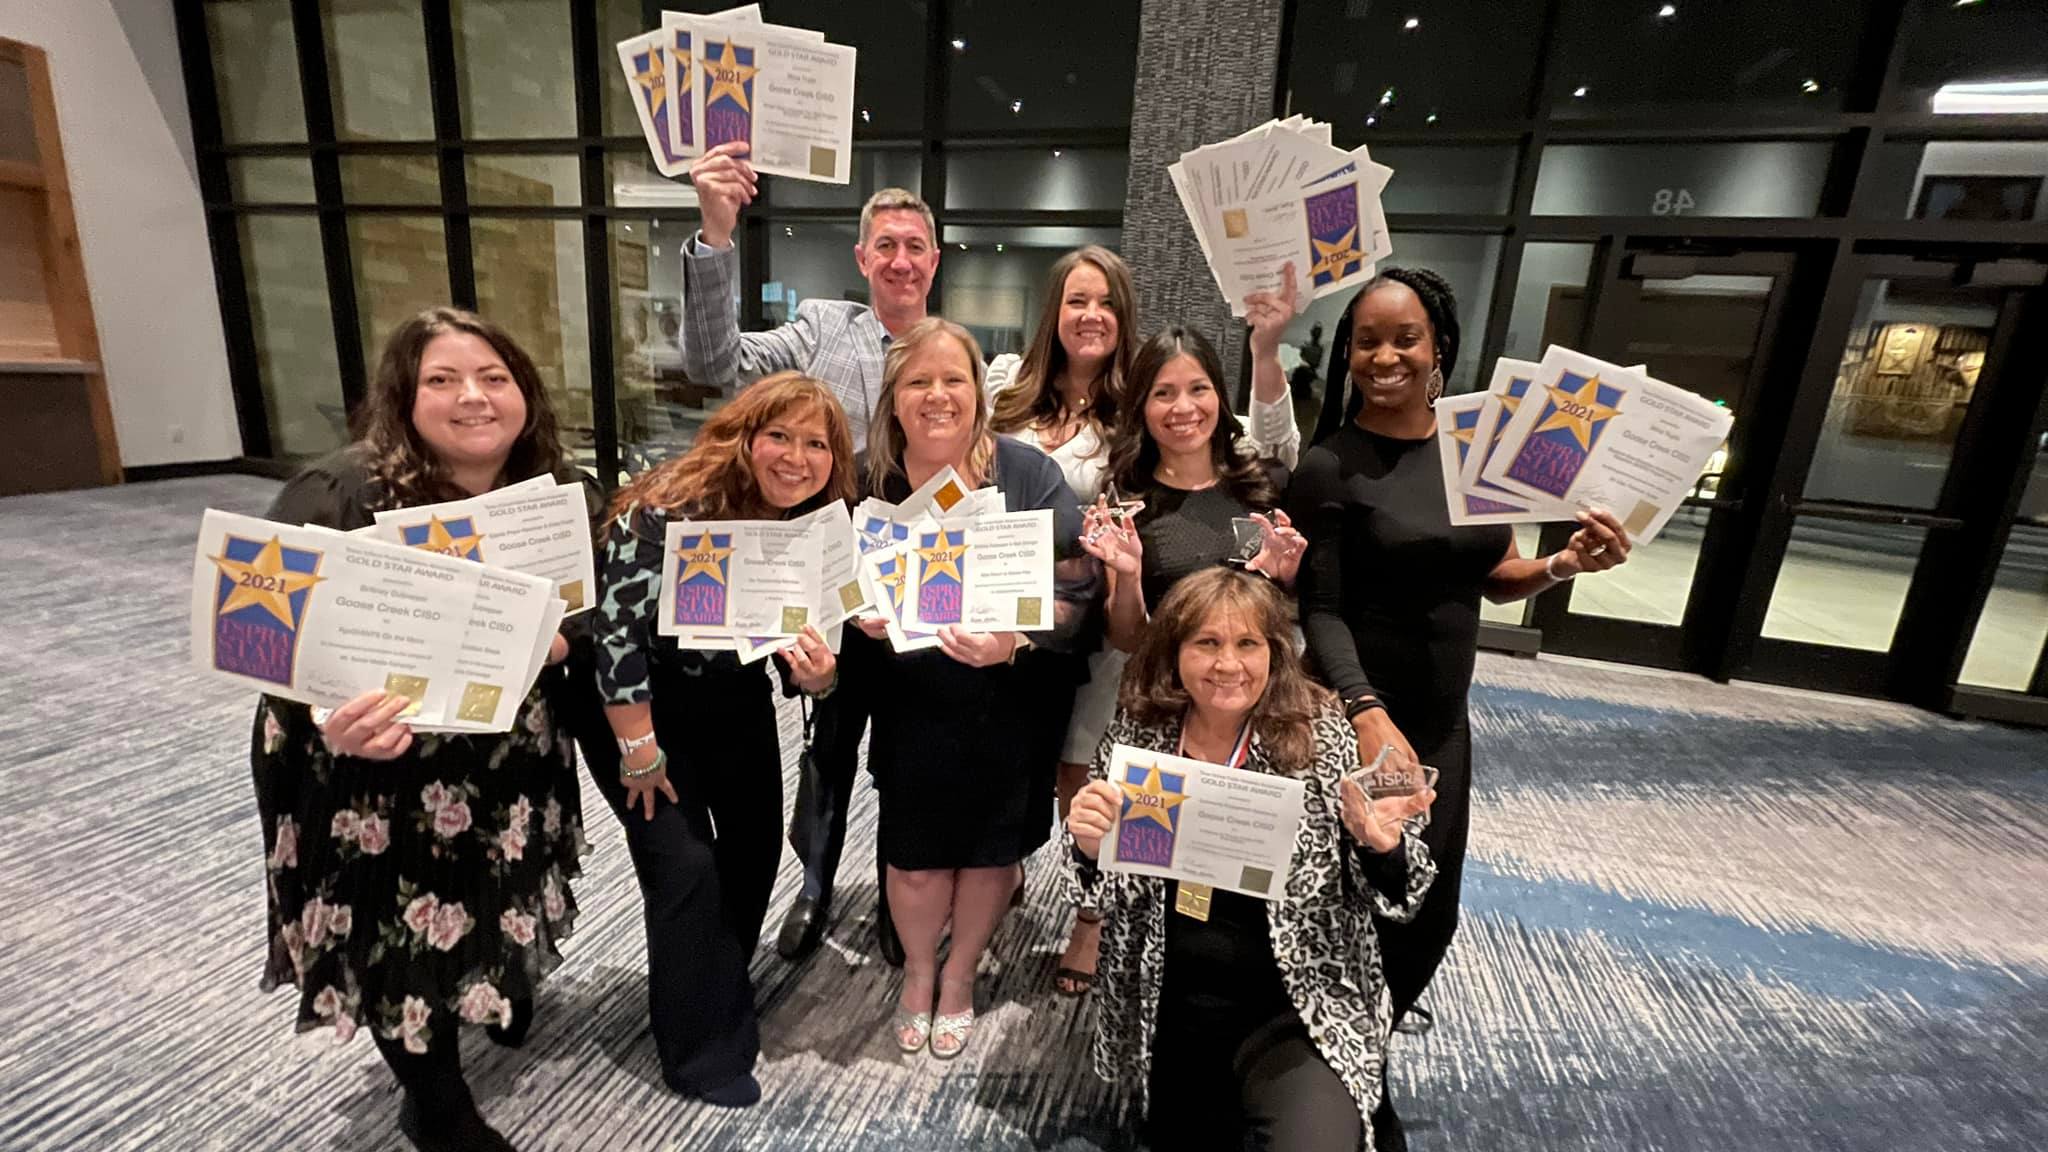 Community Engagement Team poses with awards at TSPRA conference